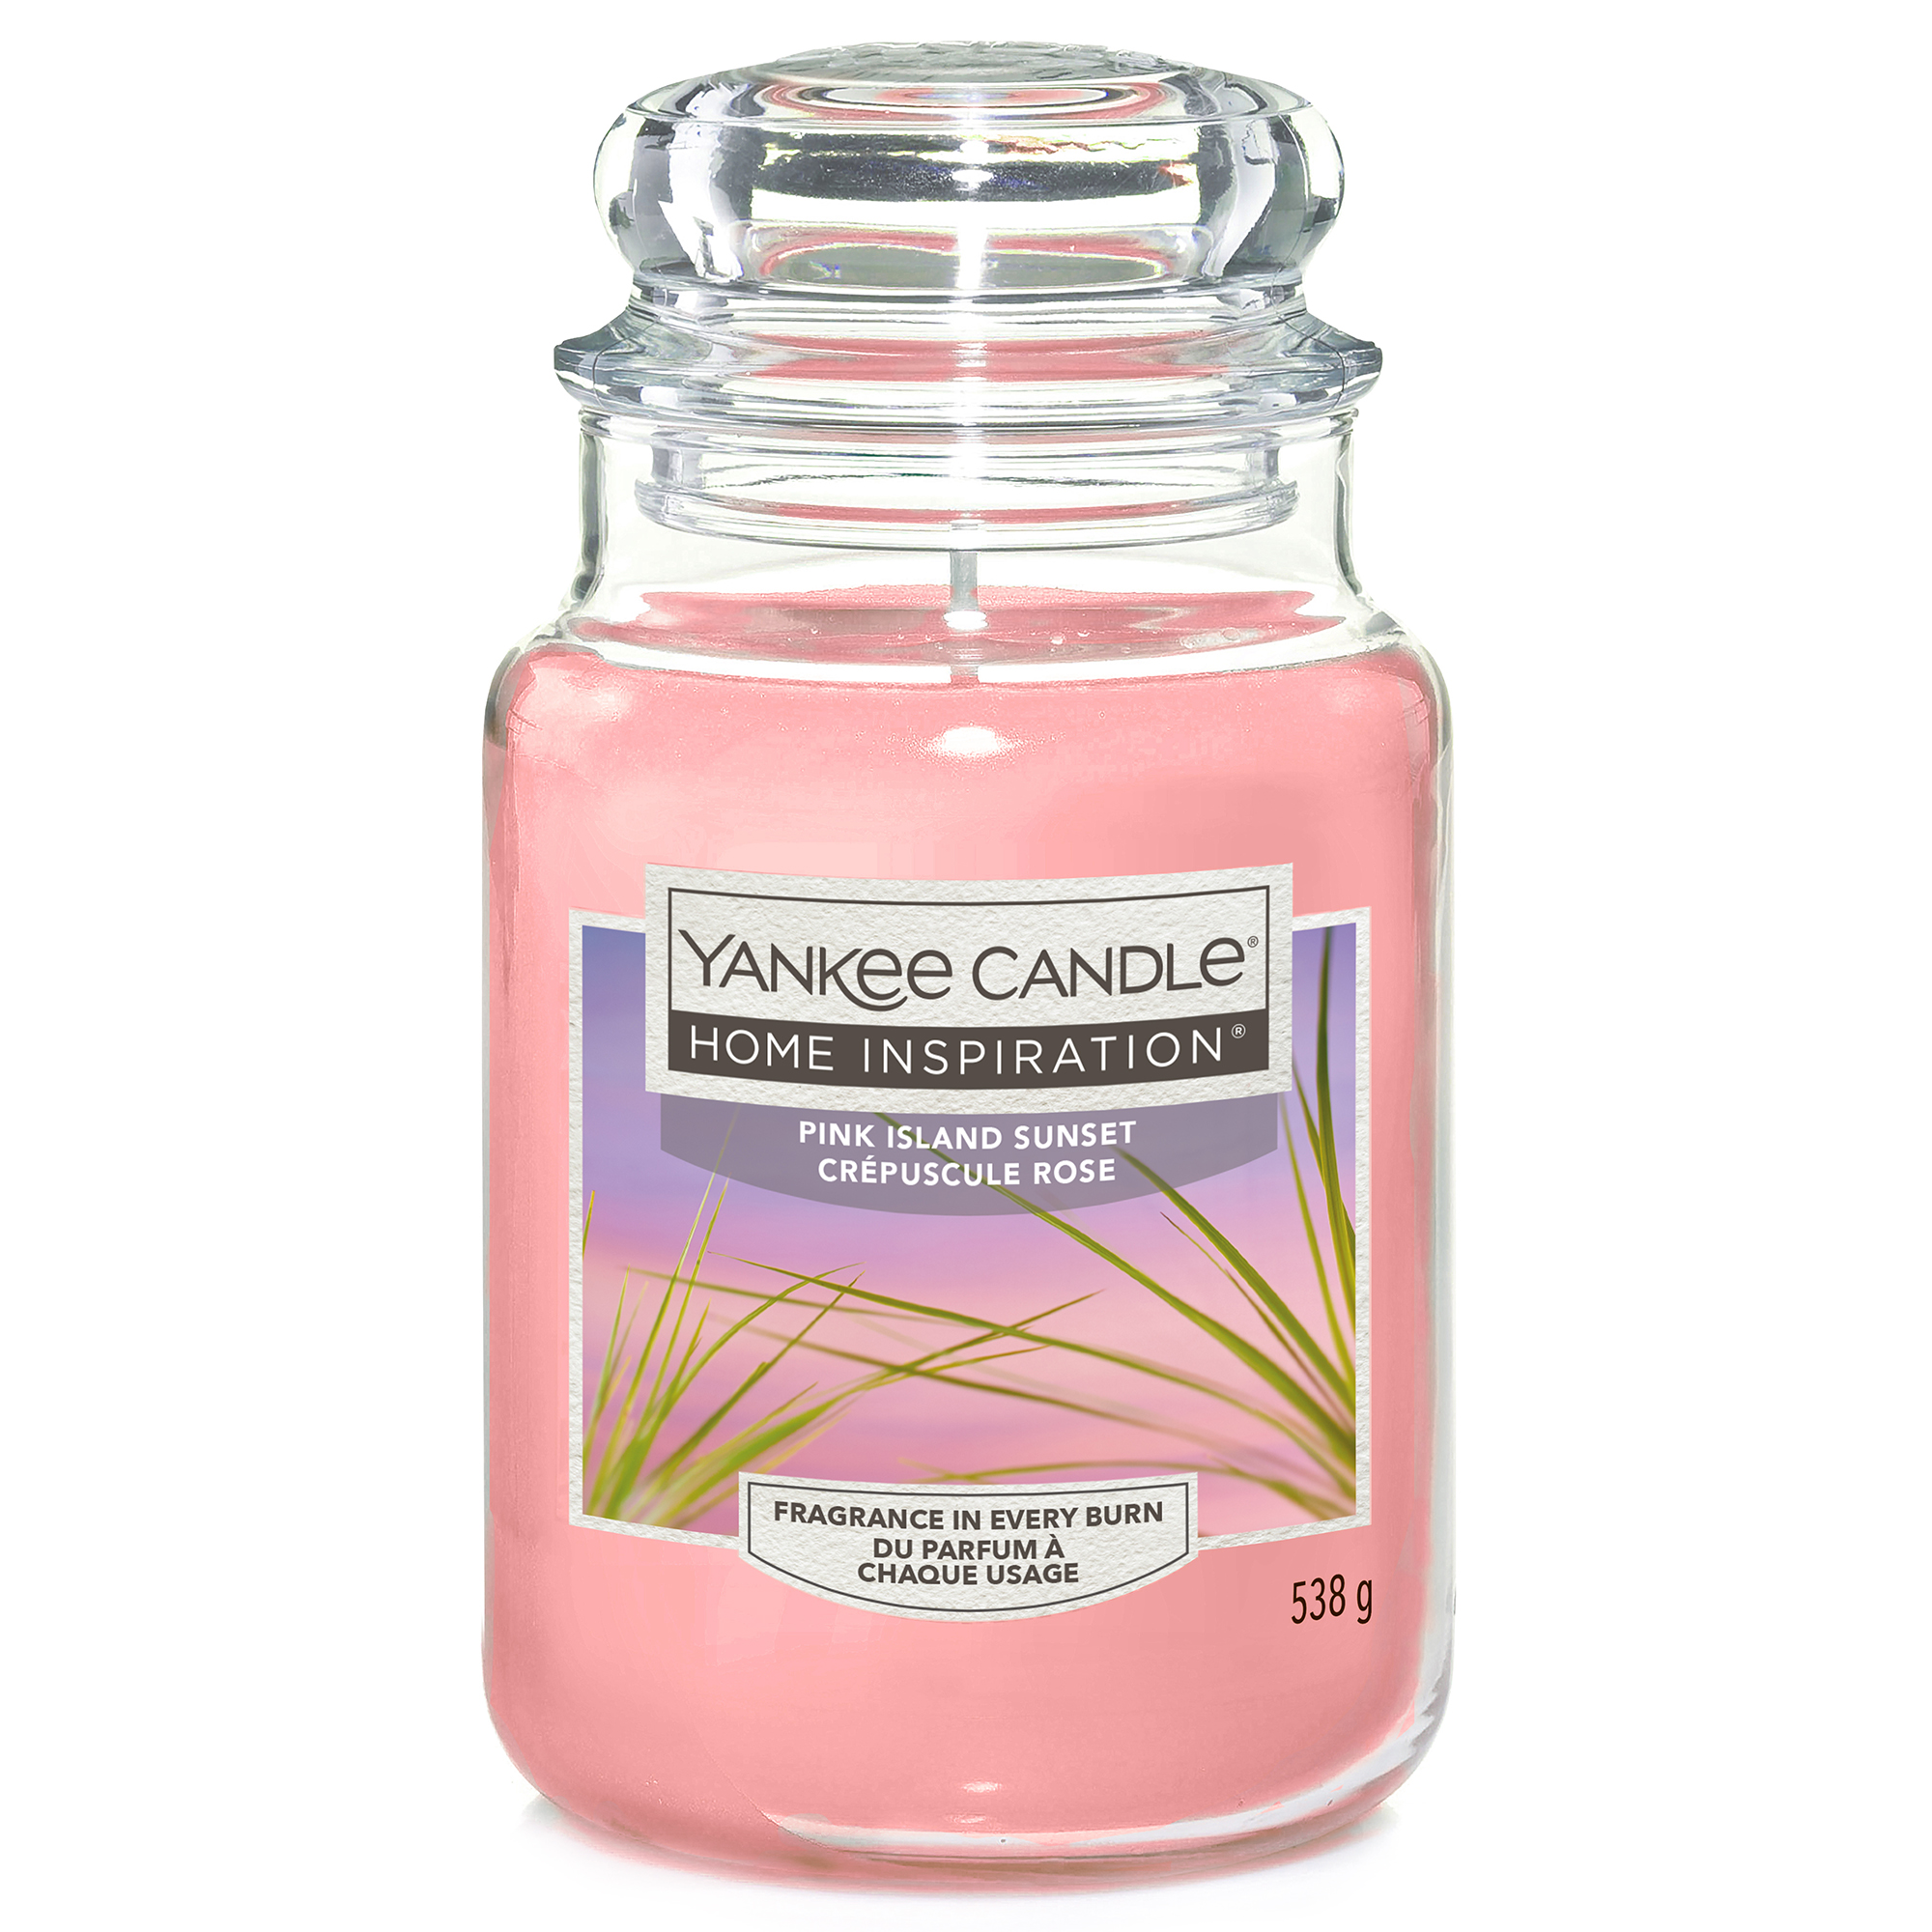 Large Home Inspiration Yankee Candle - Pink Island Sunset